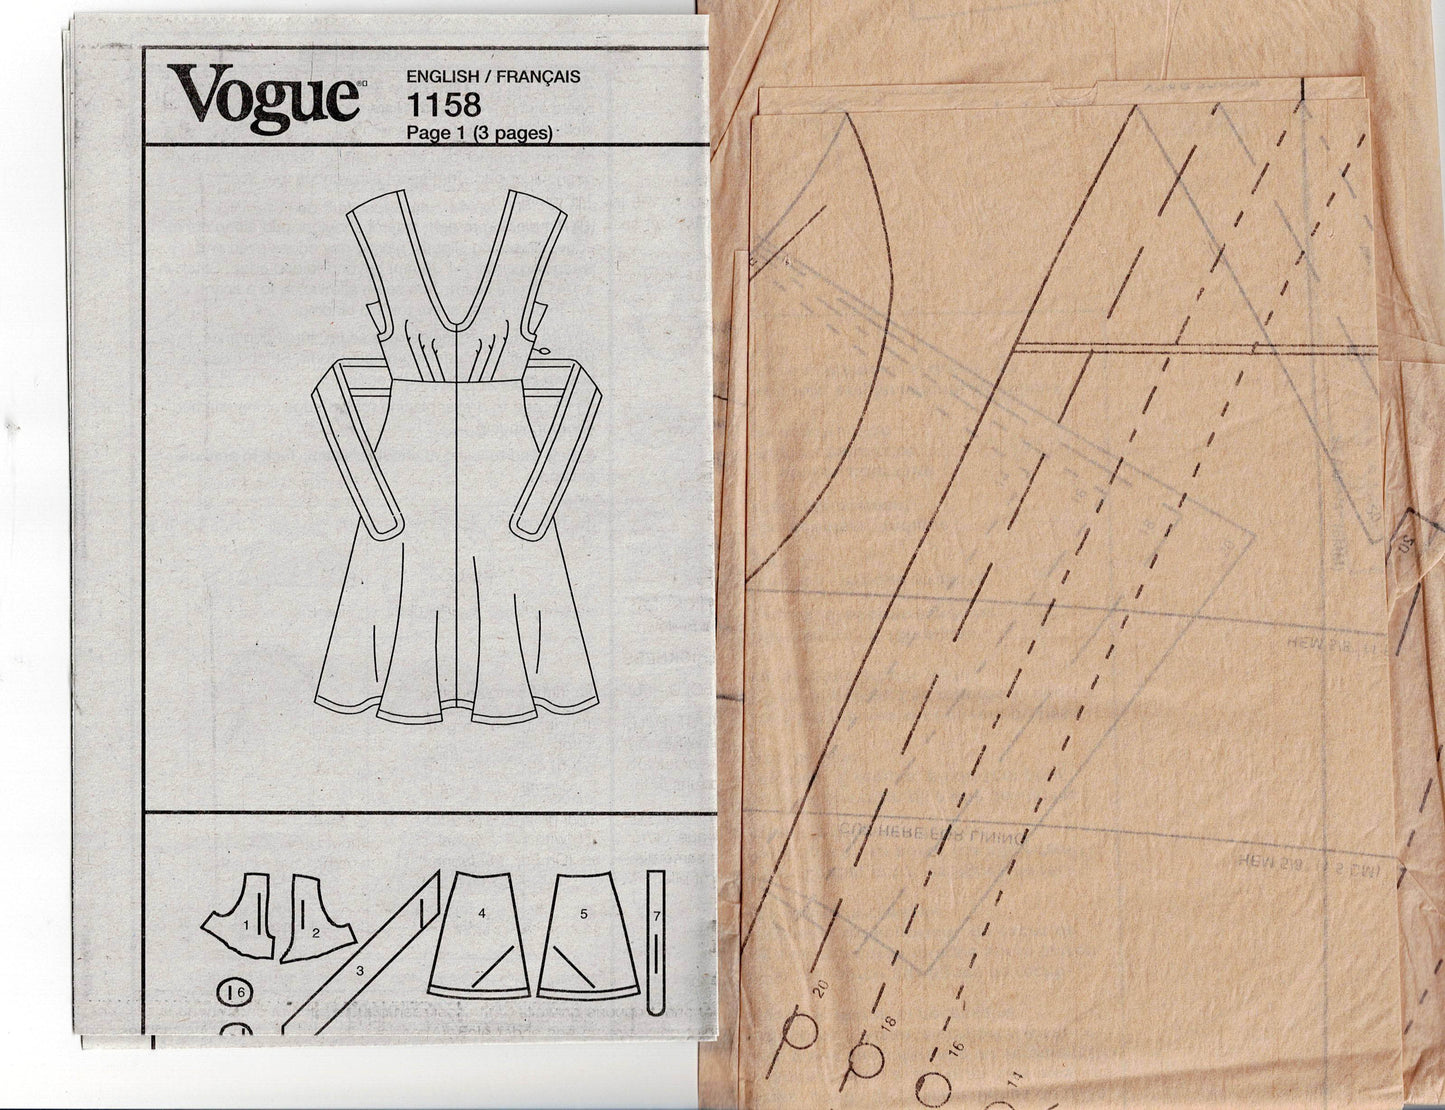 Vogue American Designer 1158 TRACY REESE Womens Sleeveless Bias Cut Dress with V Back & Front Ties Out Of Print Sewing Pattern Size 14 - 20 UNCUT Factory Folded